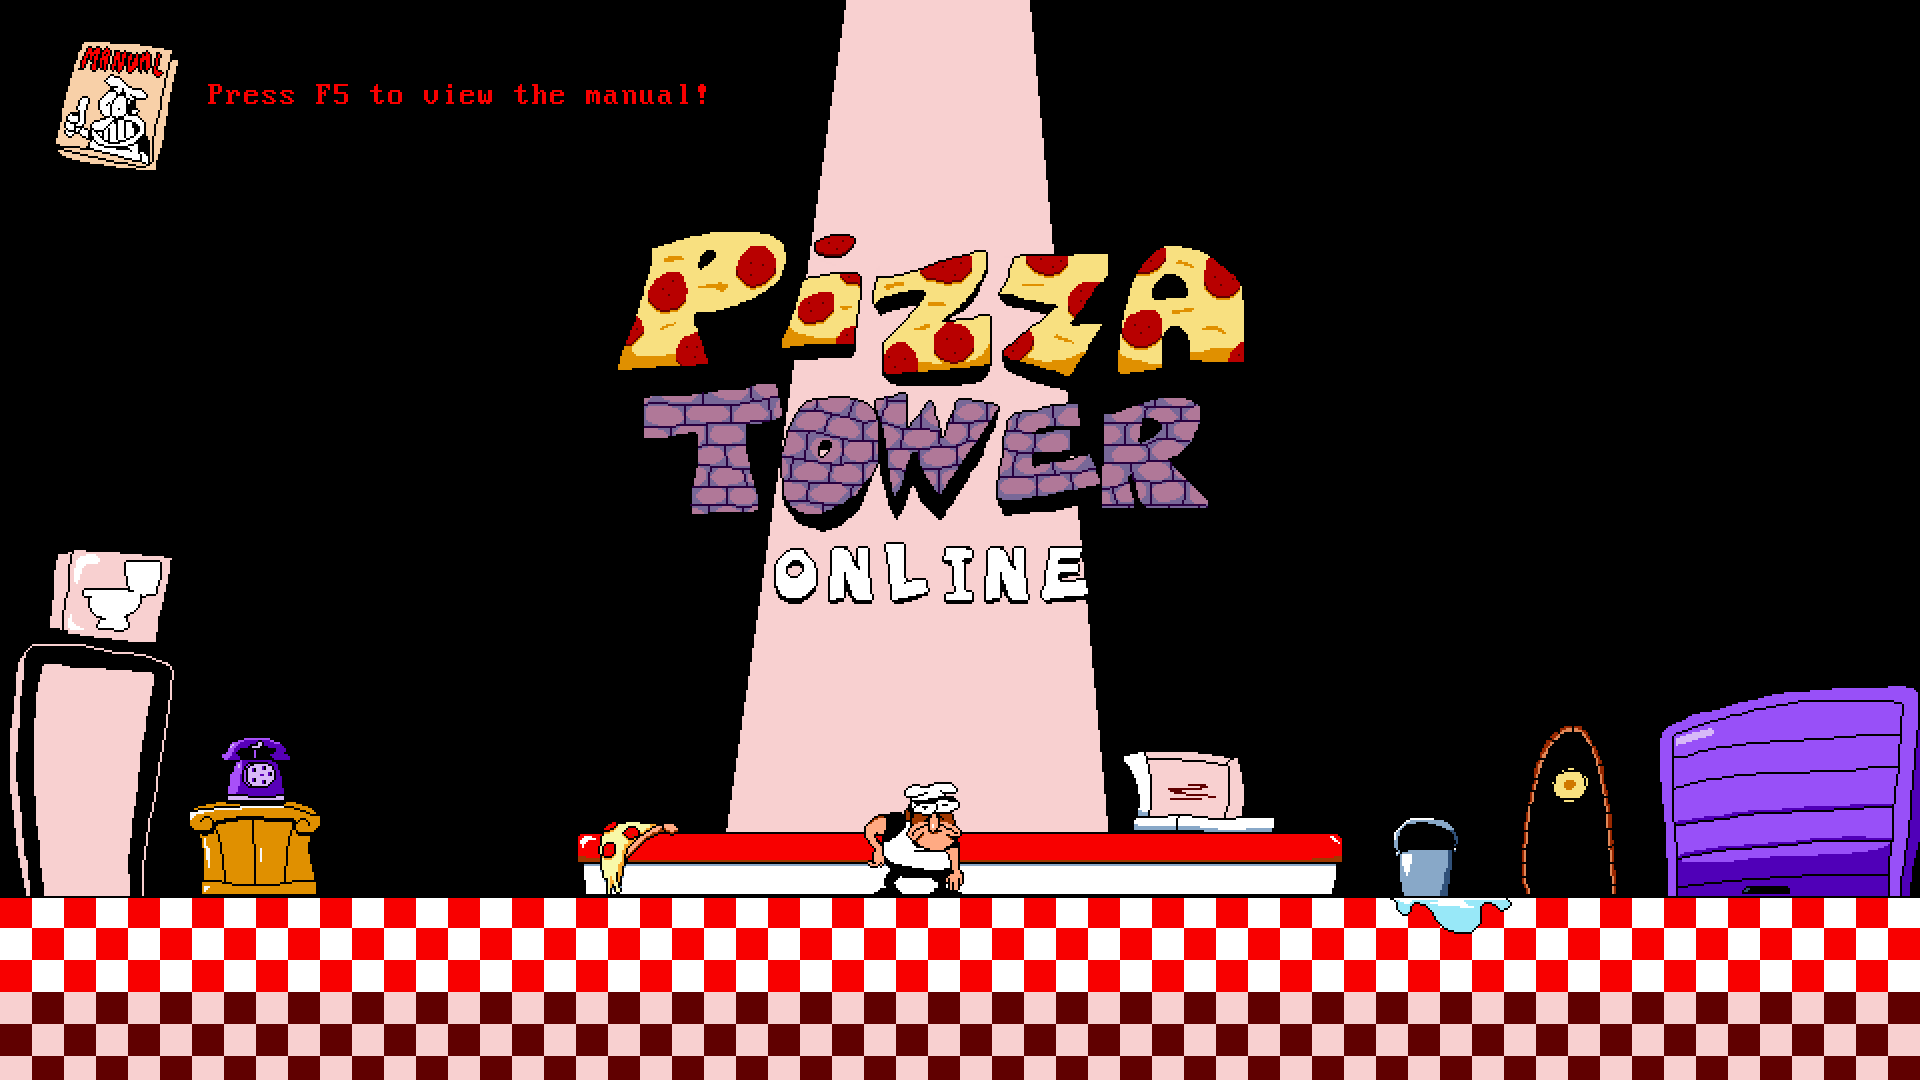 Pizza Tower  Play Now Online for Free 